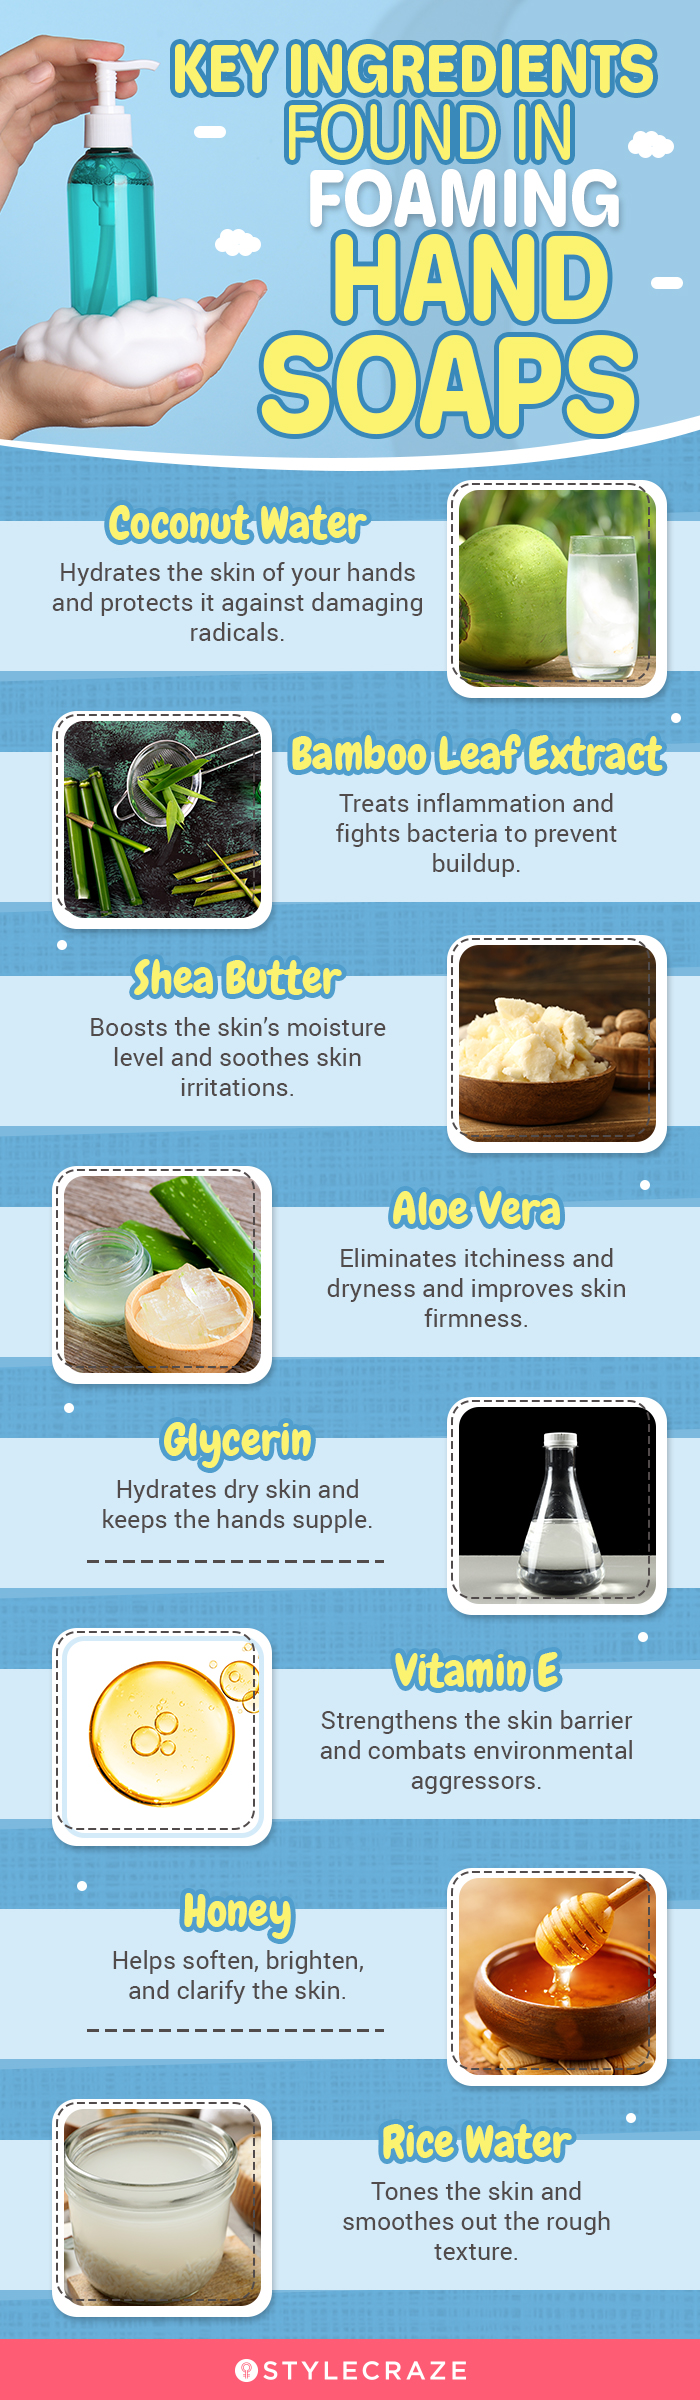 Key Ingredients Found In Foaming Hand Soaps (infographic)